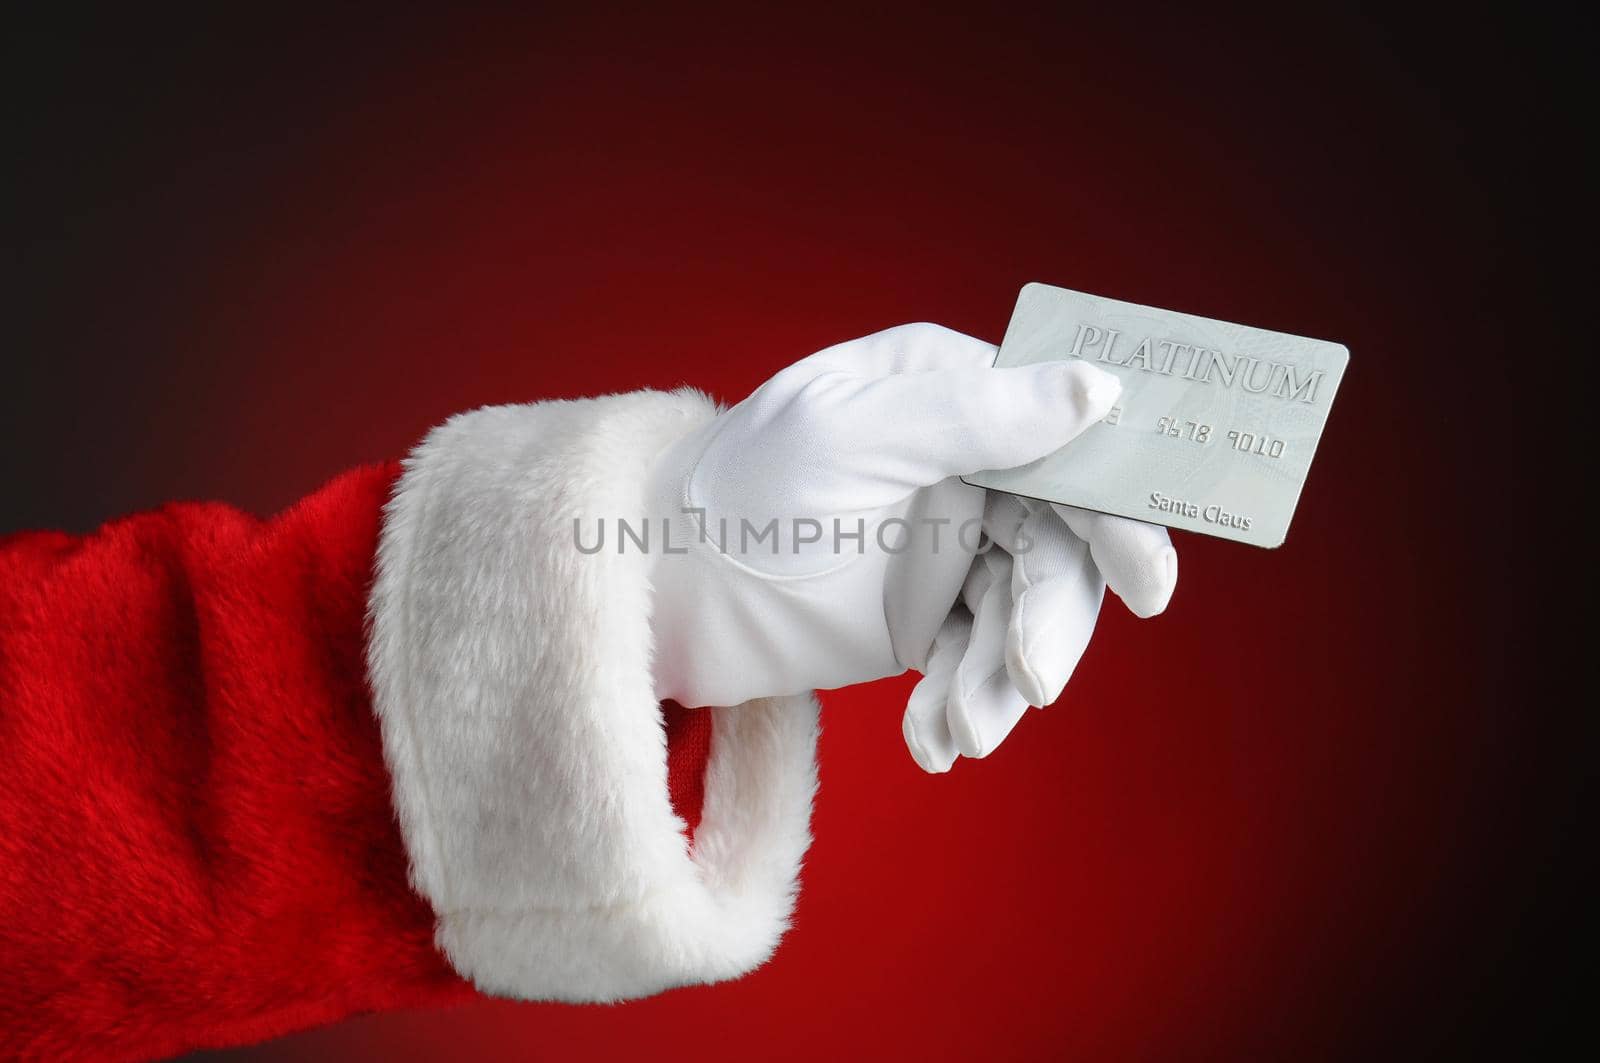 Closeup of Santa Claus hand holding a Platinum Credit Card. Horizontal format over a light to dark red background.